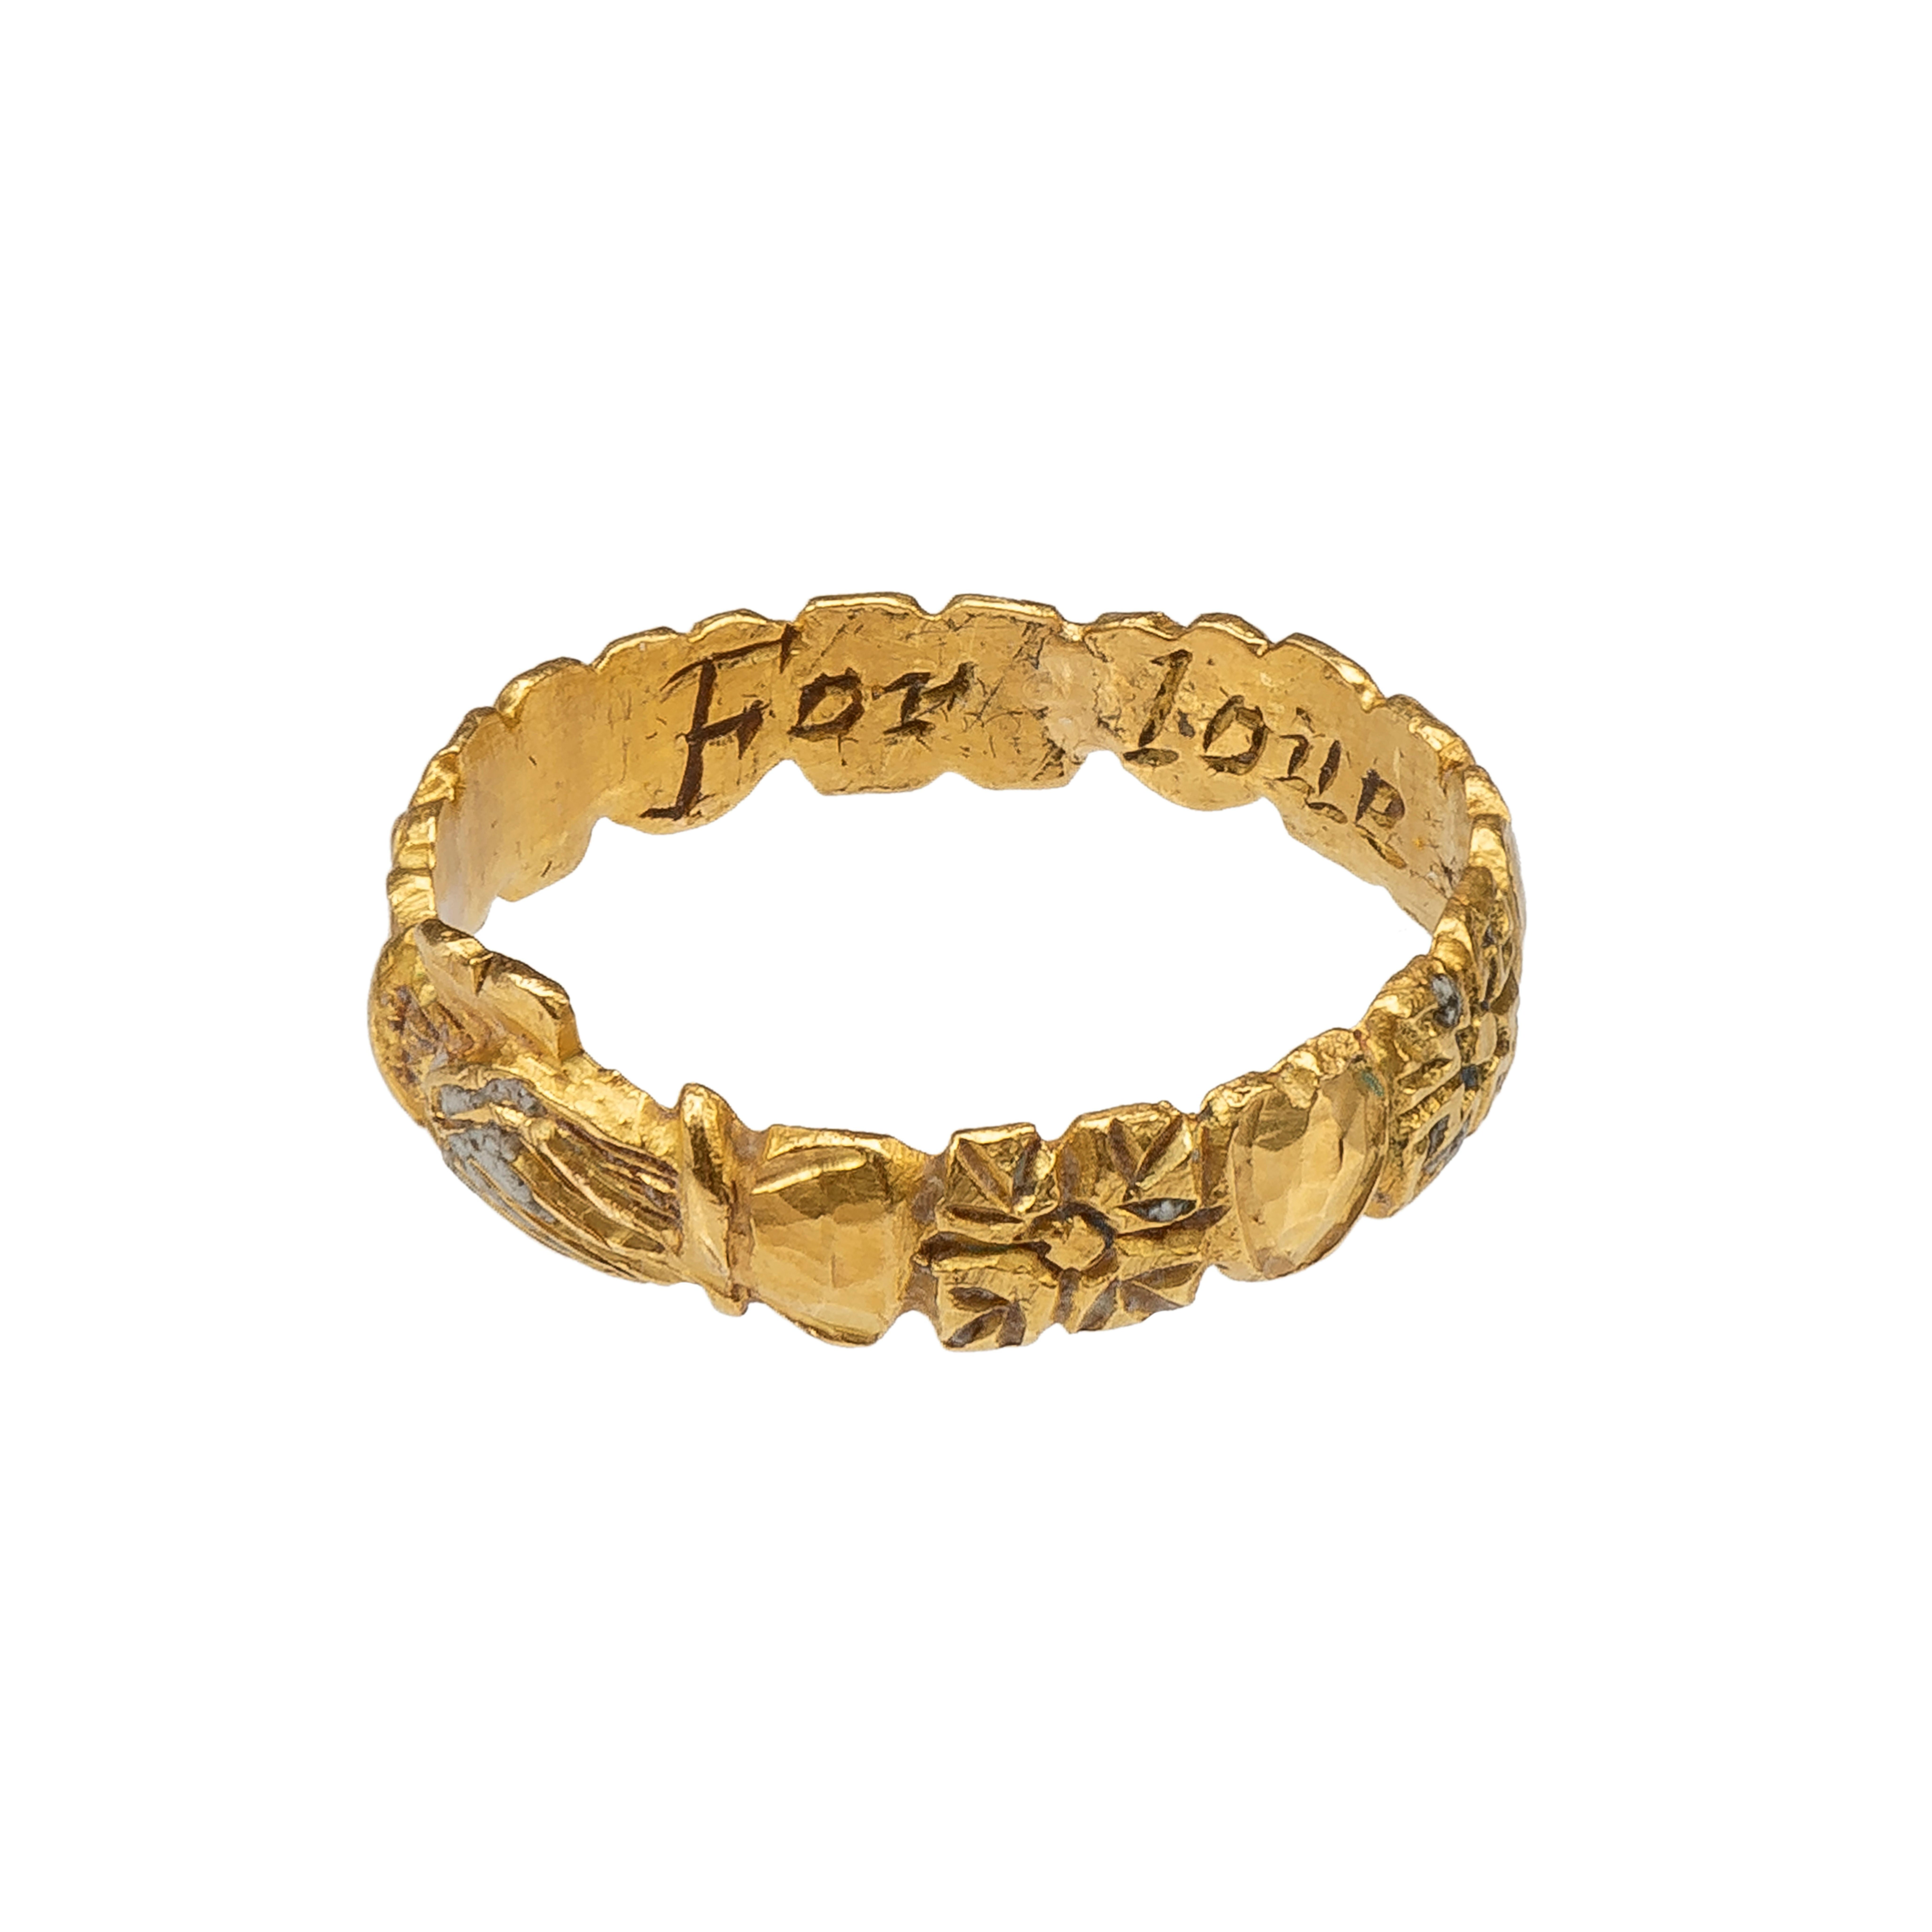 Fede Ring with Heart
England, 17th century 
Gold, enamel 
Weight 1.88 gr.; circumference 44.77mm.; US size 3,1/4; UK size F 3/4

Elaborately decorated posy ring, with messages of love and affection. 
Gold band, flat on the interior, chased and